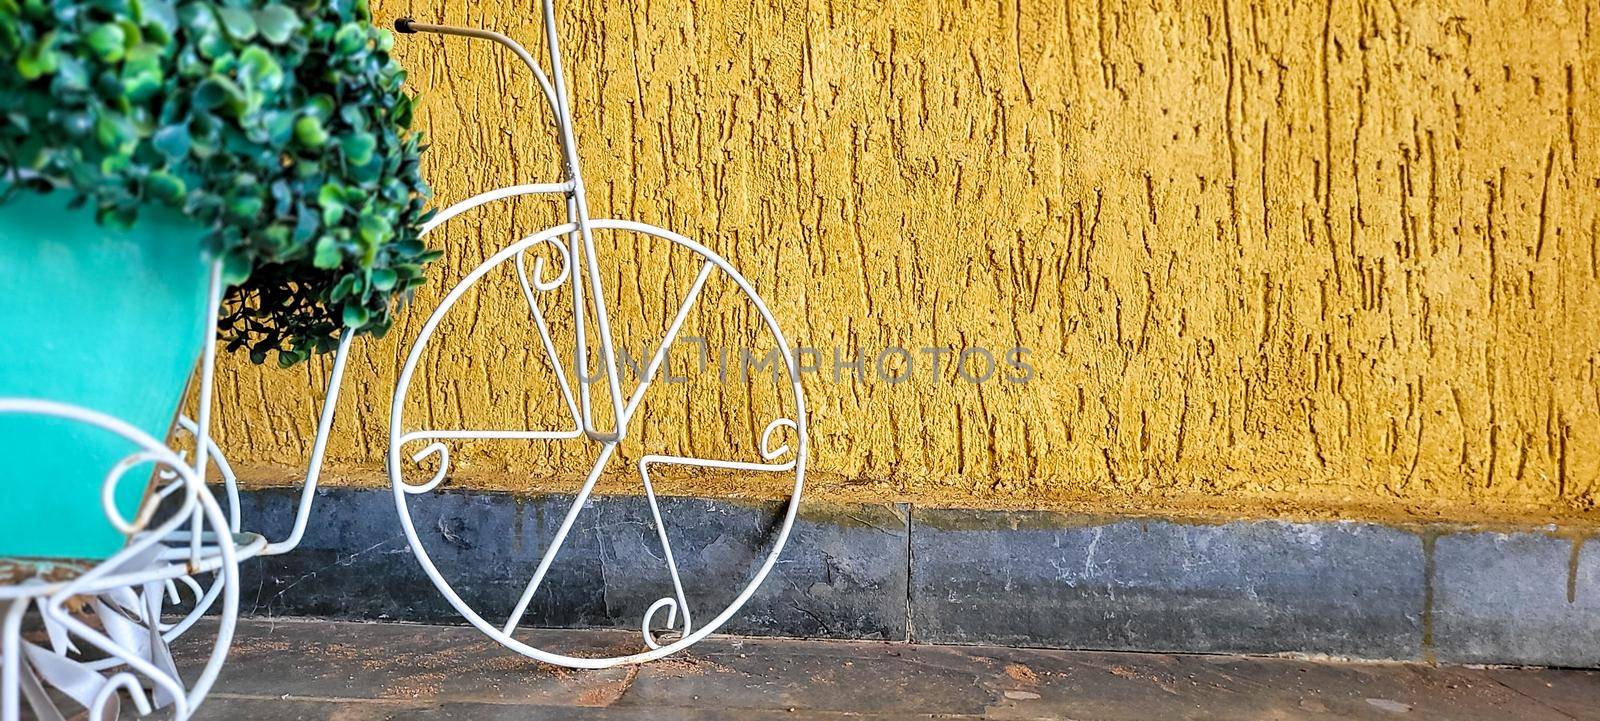 golden background with garden decoration with old bicycle by sarsa